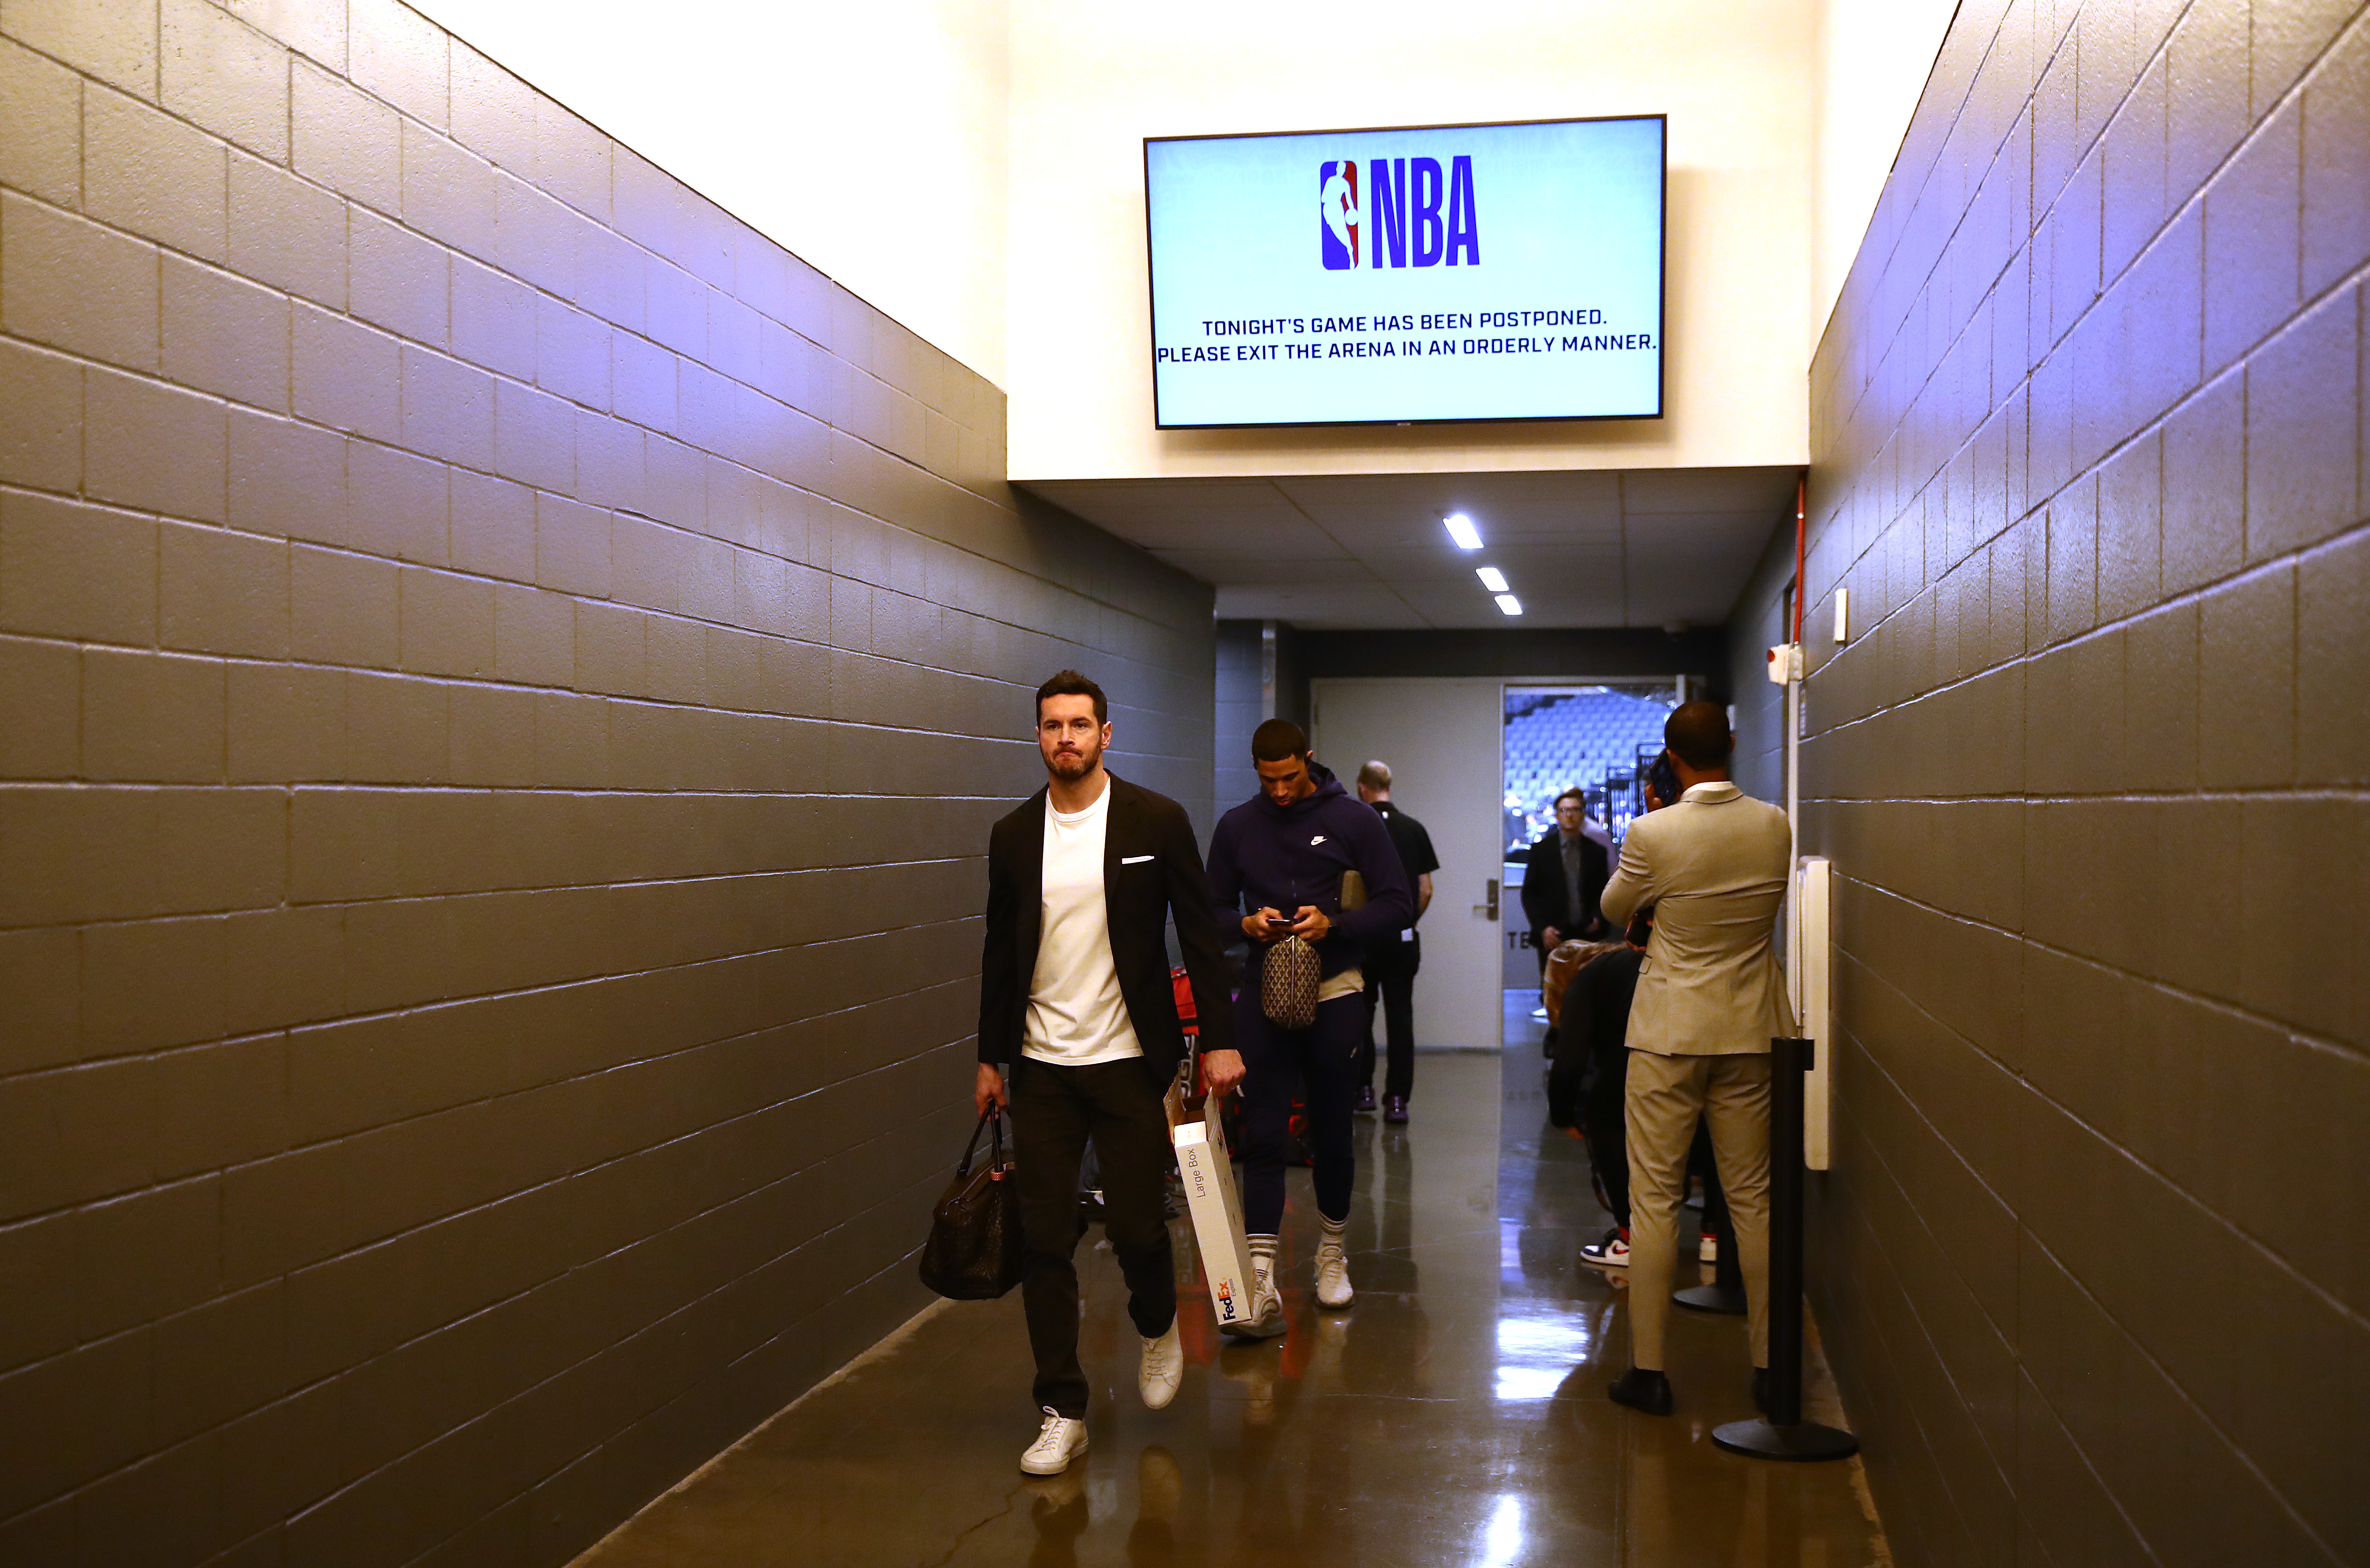 JJ Redick Carries 2 Pairs of These $425 White Sneakers Wherever He Goes